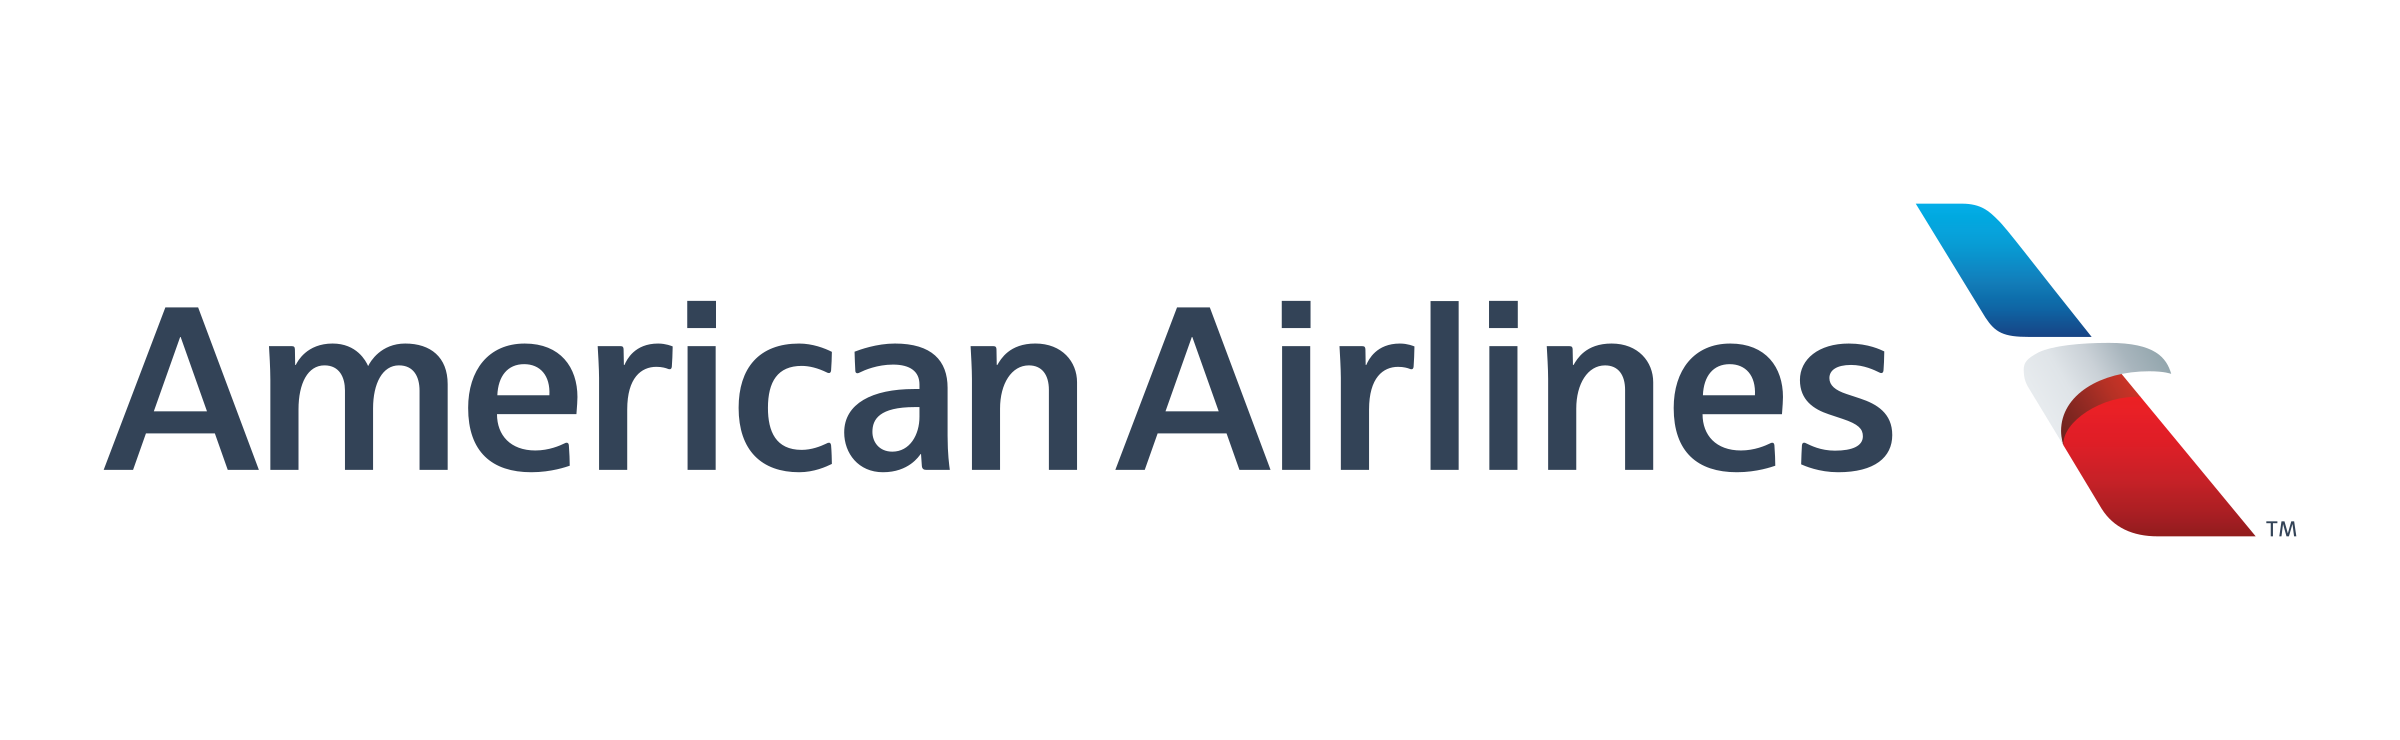 American Airlines logo png transparent, American Airlines PNG - Free PNG